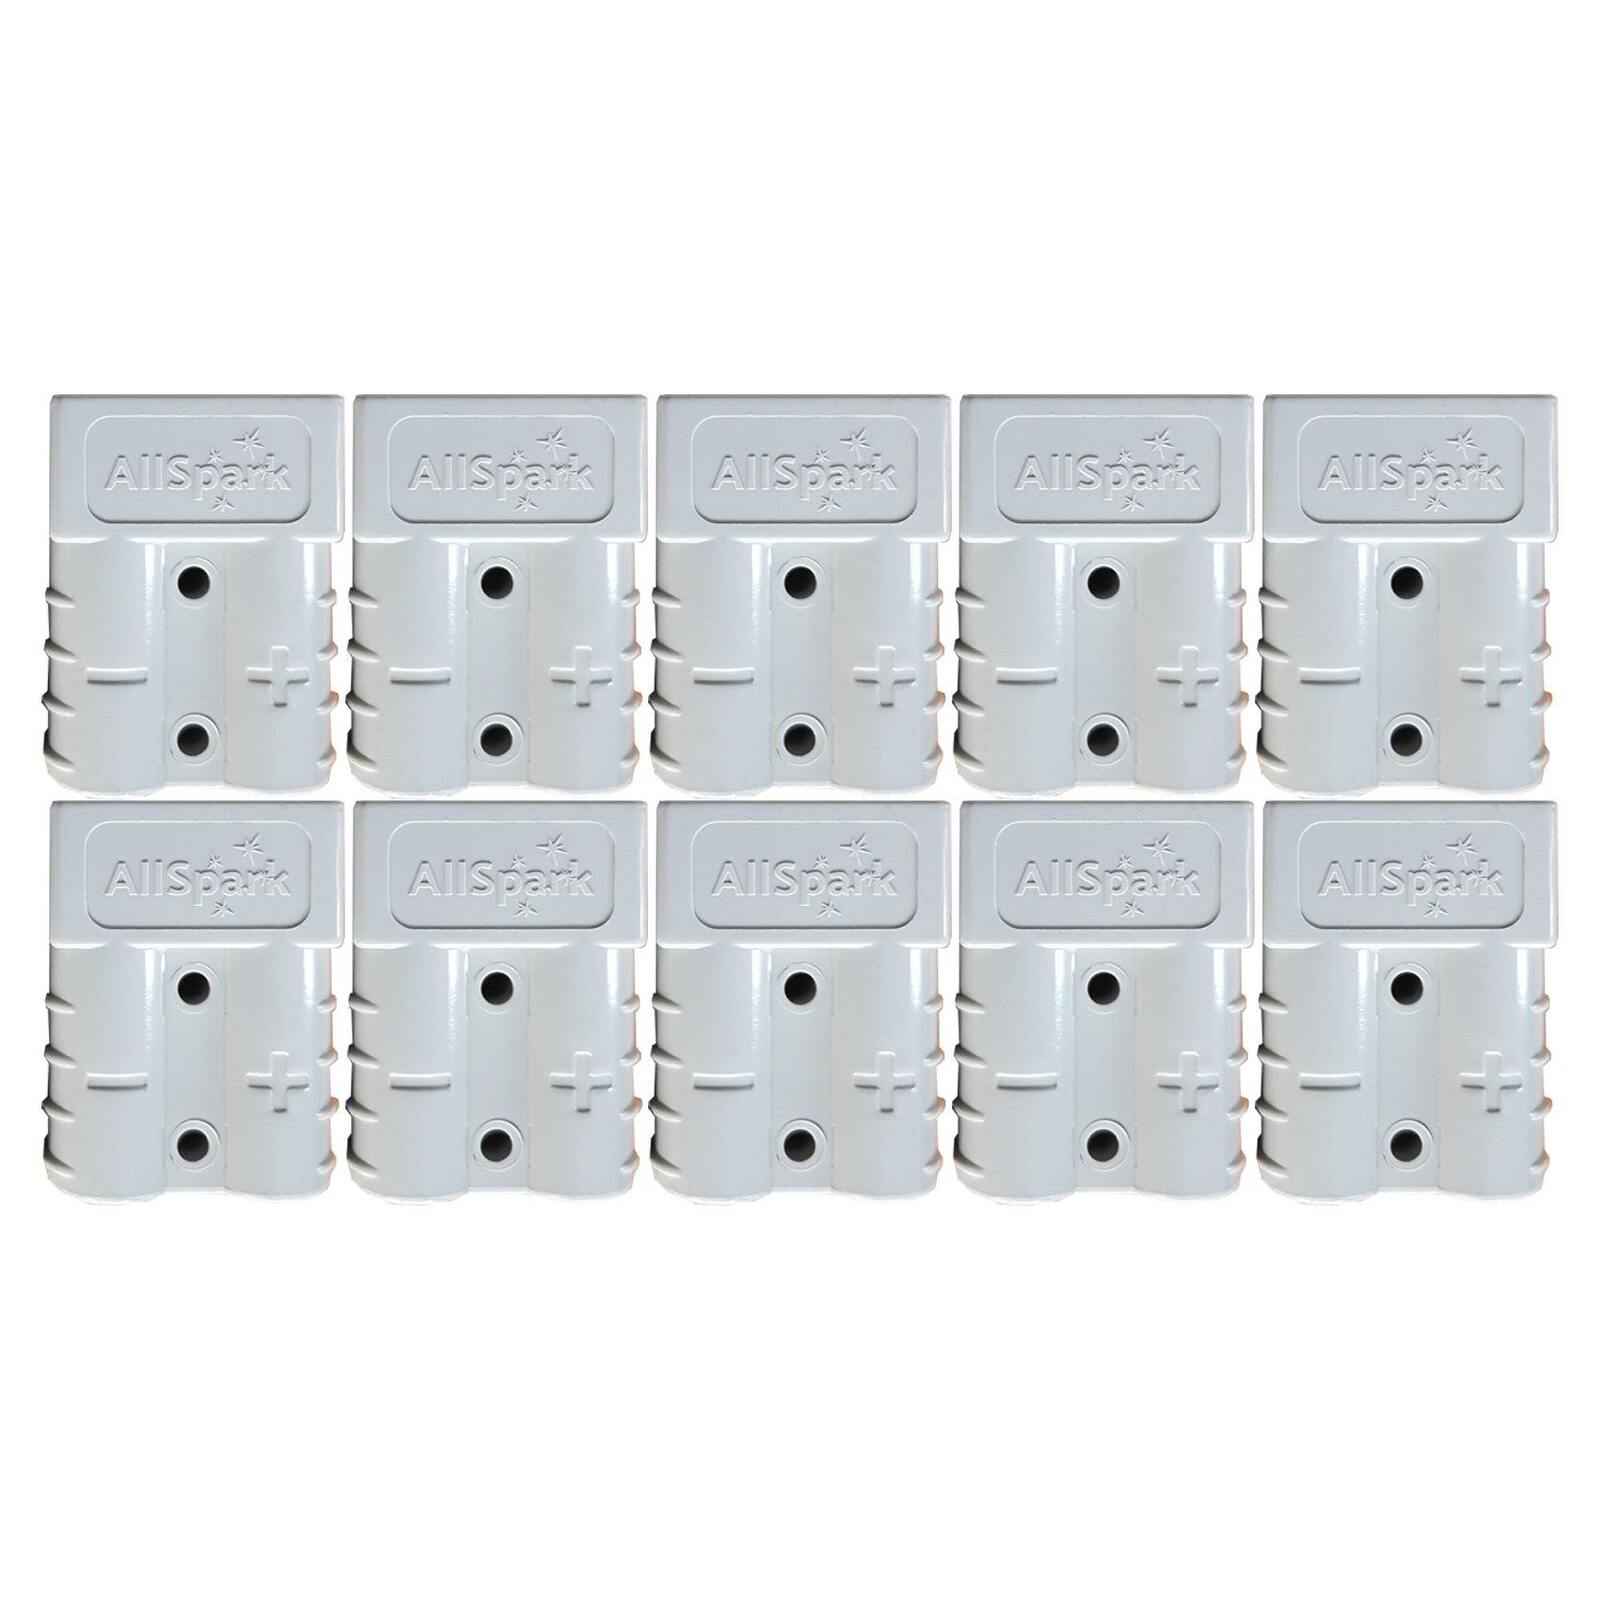 AllSpark 50A Anderson Style Plug Connector Single - 10 pack 6 AWG